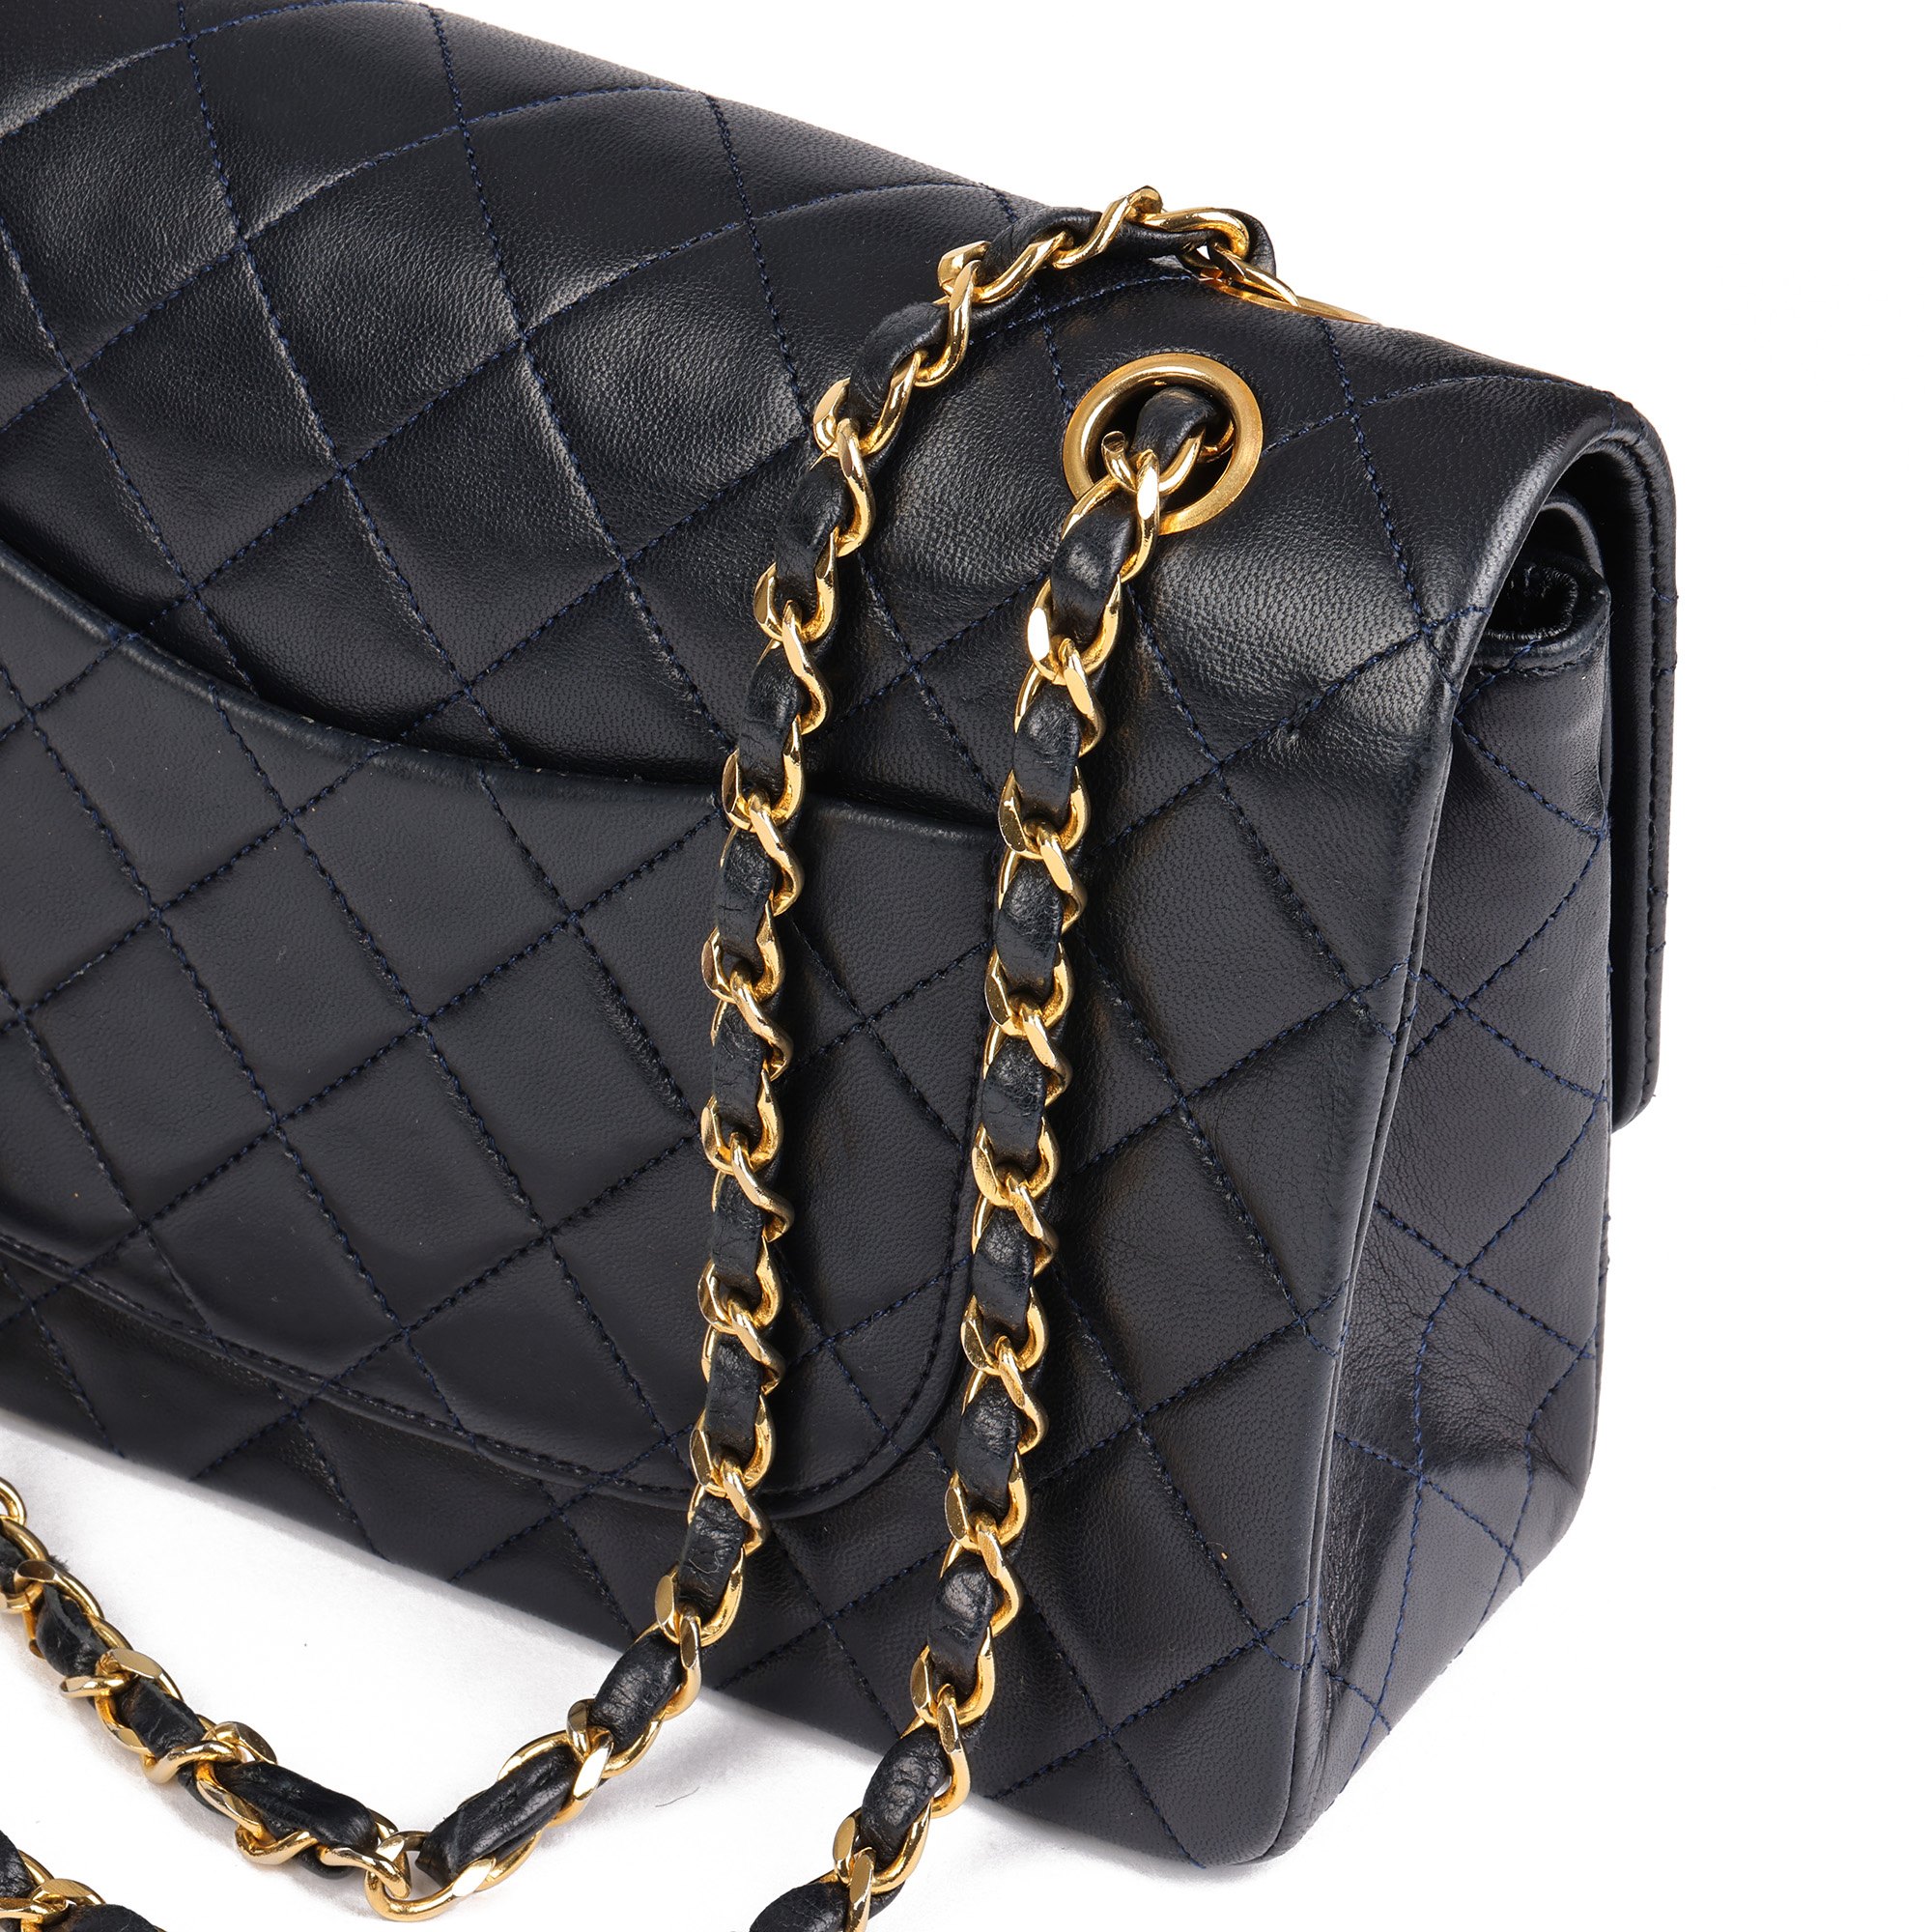 Chanel Navy Quilted Lambskin Vintage Medium Classic Double Flap Bag